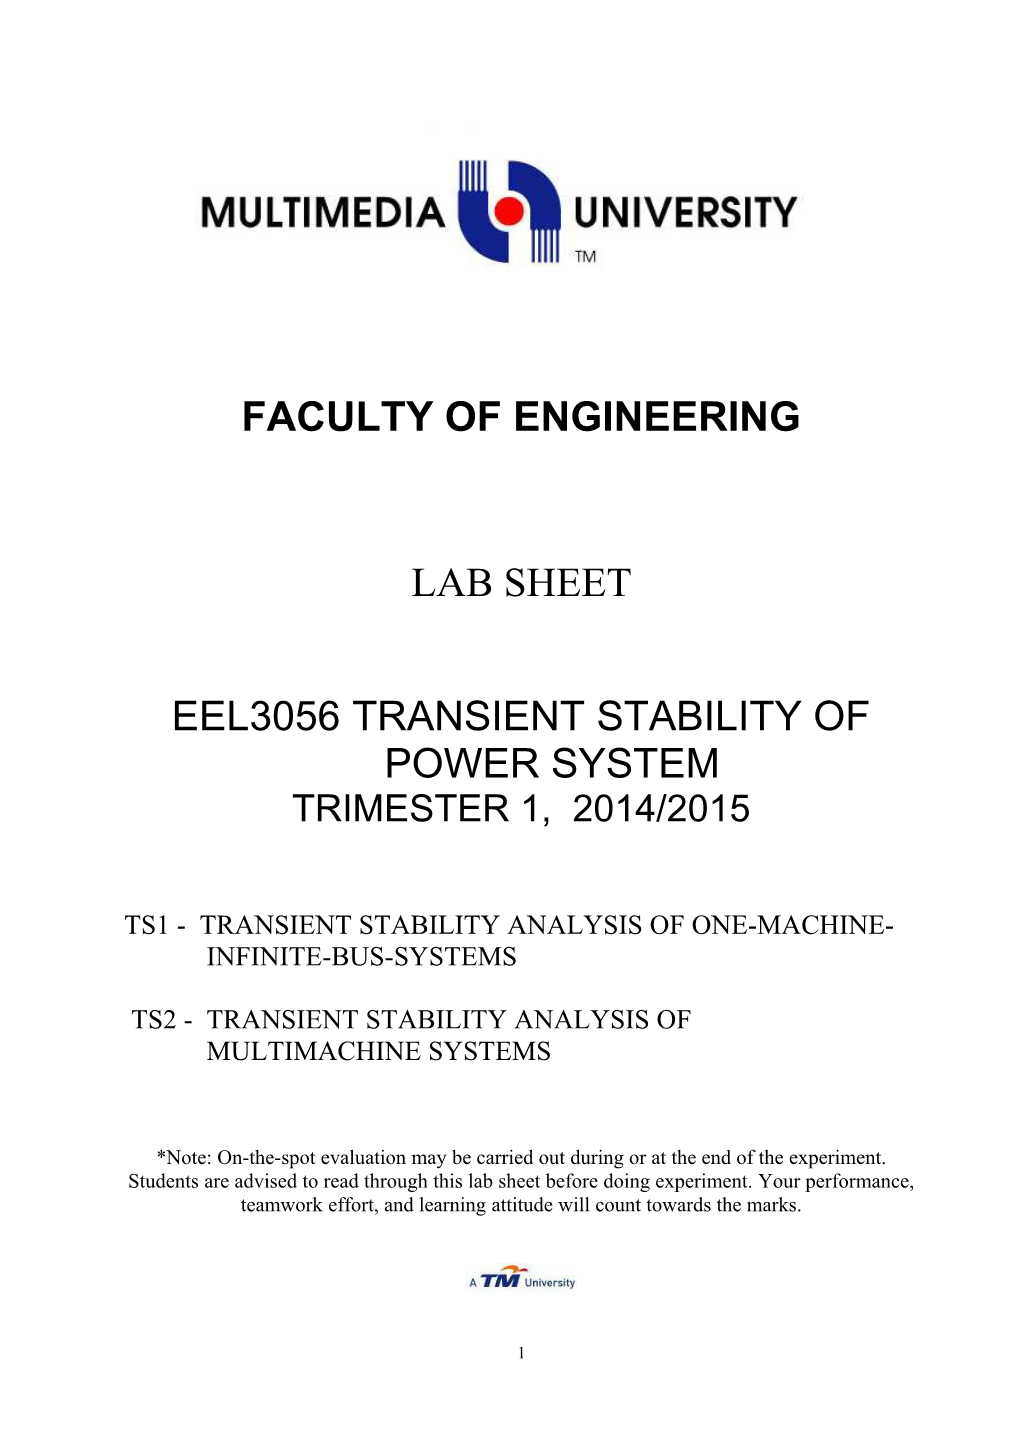 Eel3056 Transient Stability of Power System